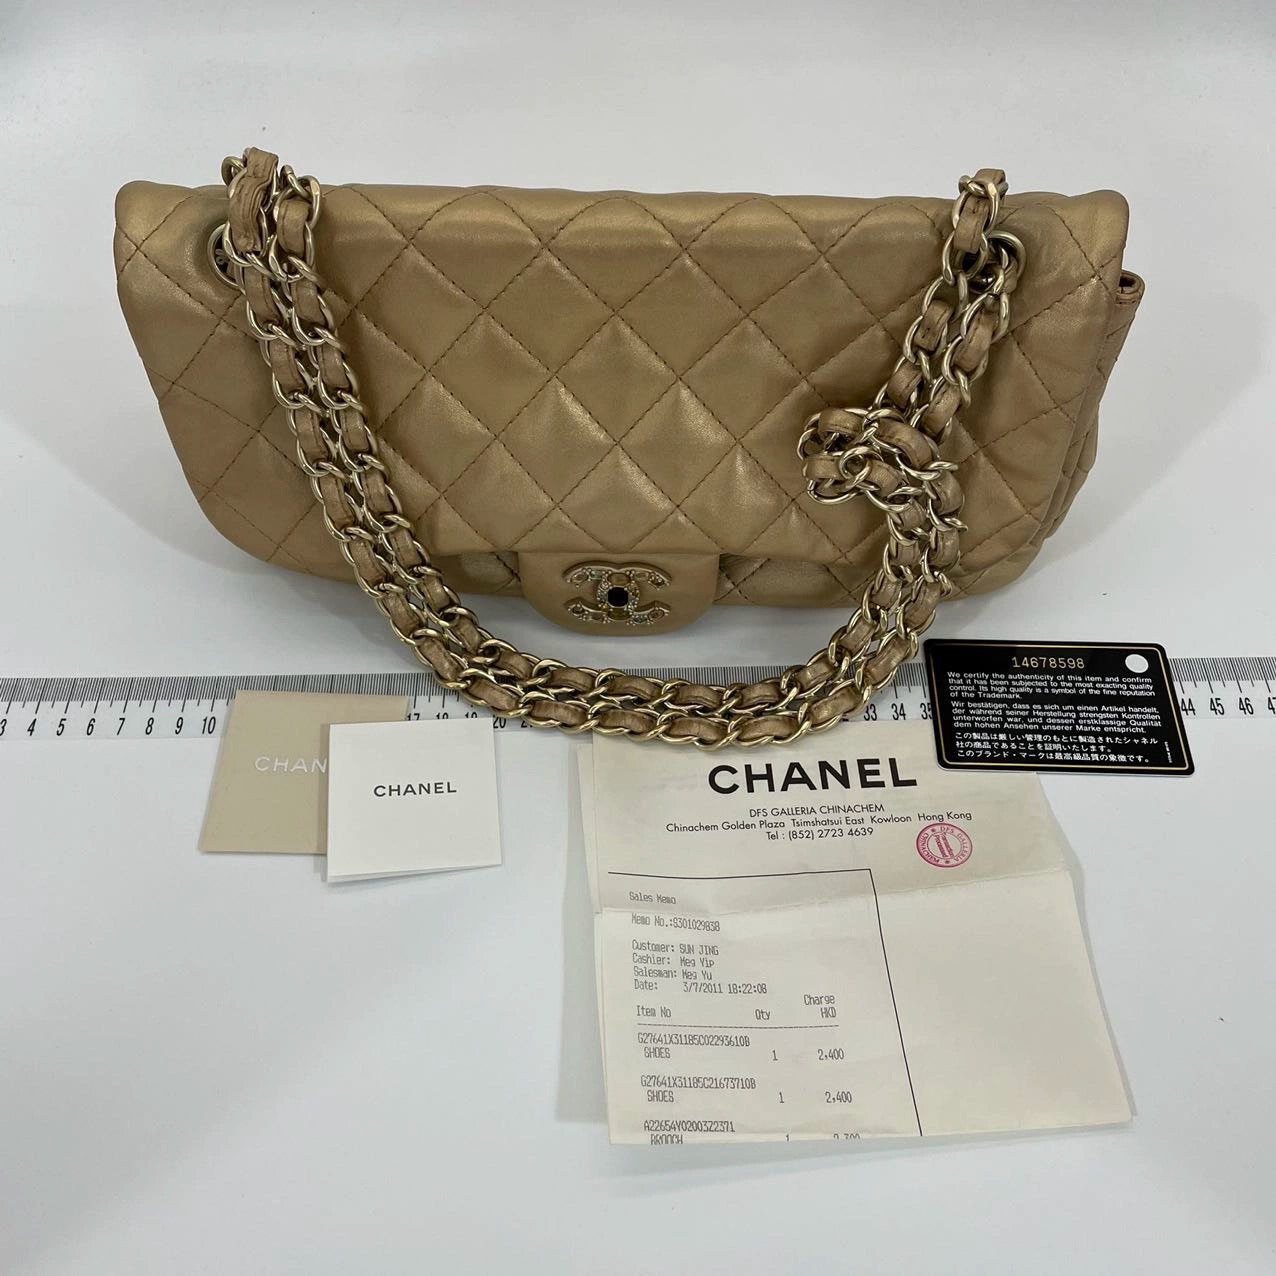 Bags | This A Cream Chanel Purse With Gold Chin Handles The Code Is 1218184  | Poshmark